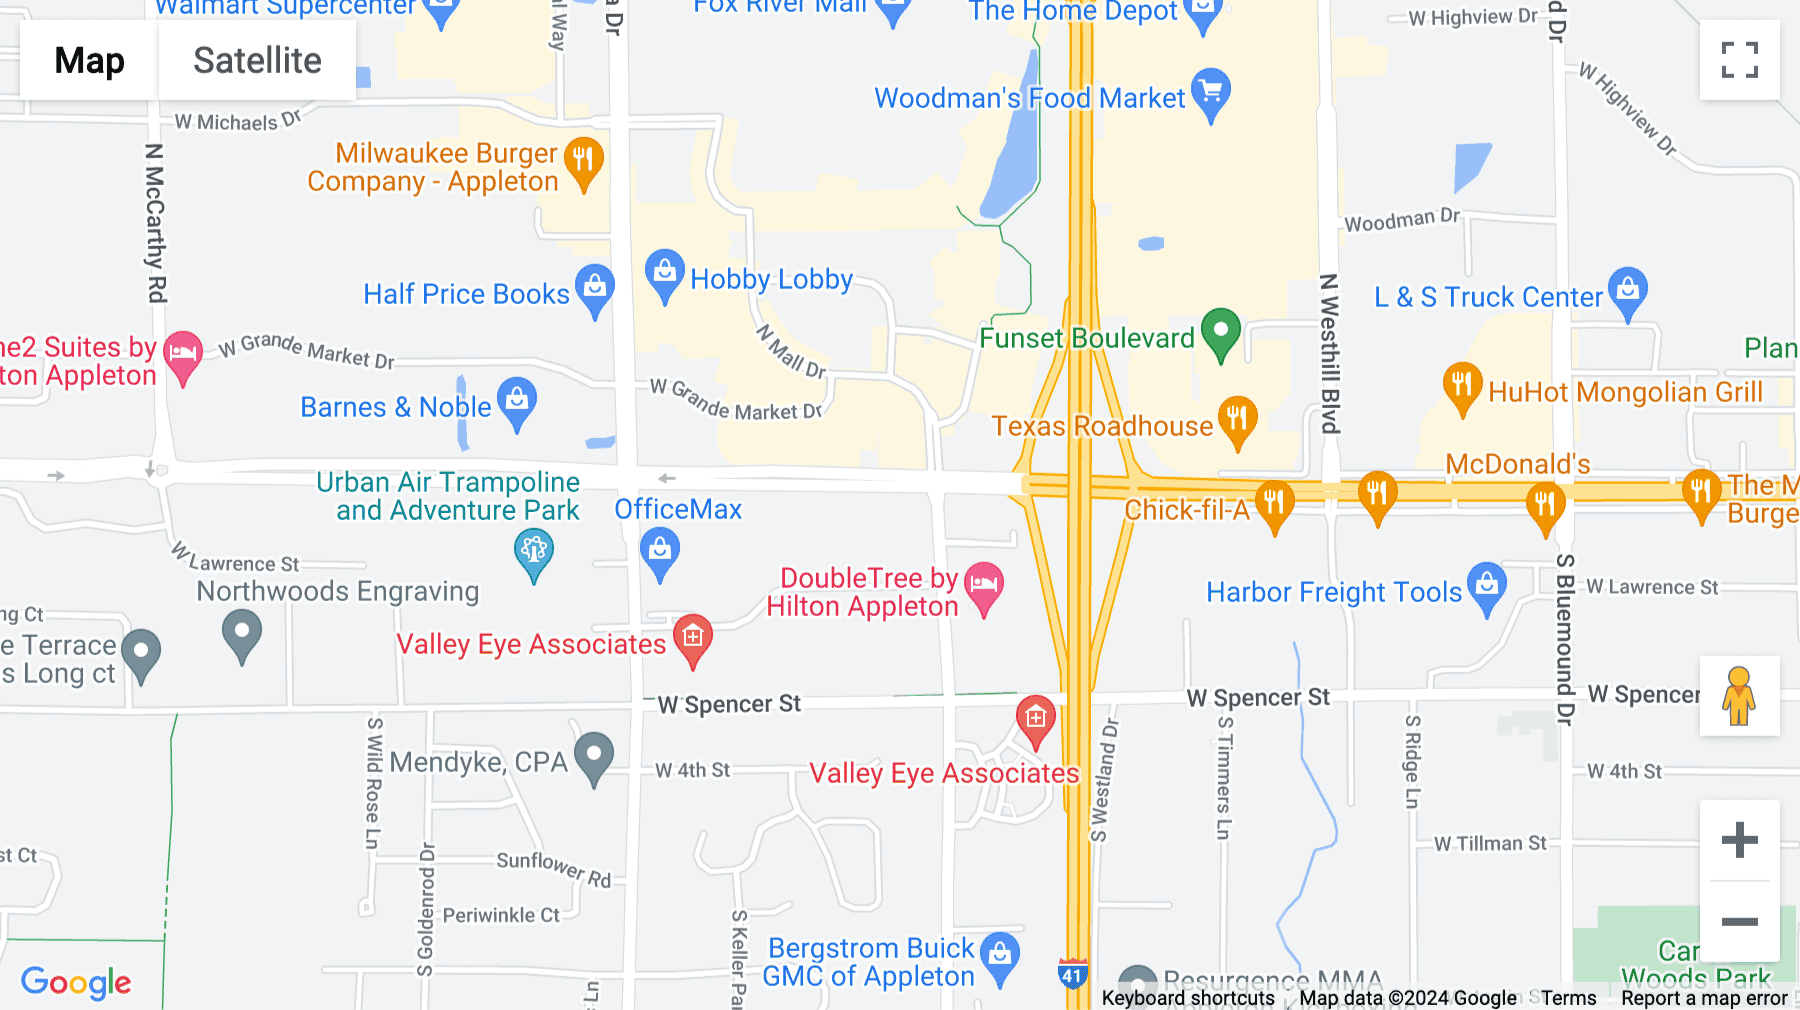 Click for interative map of 4321 West College Avenue, Suite 200, Fox River Mall, Appleton